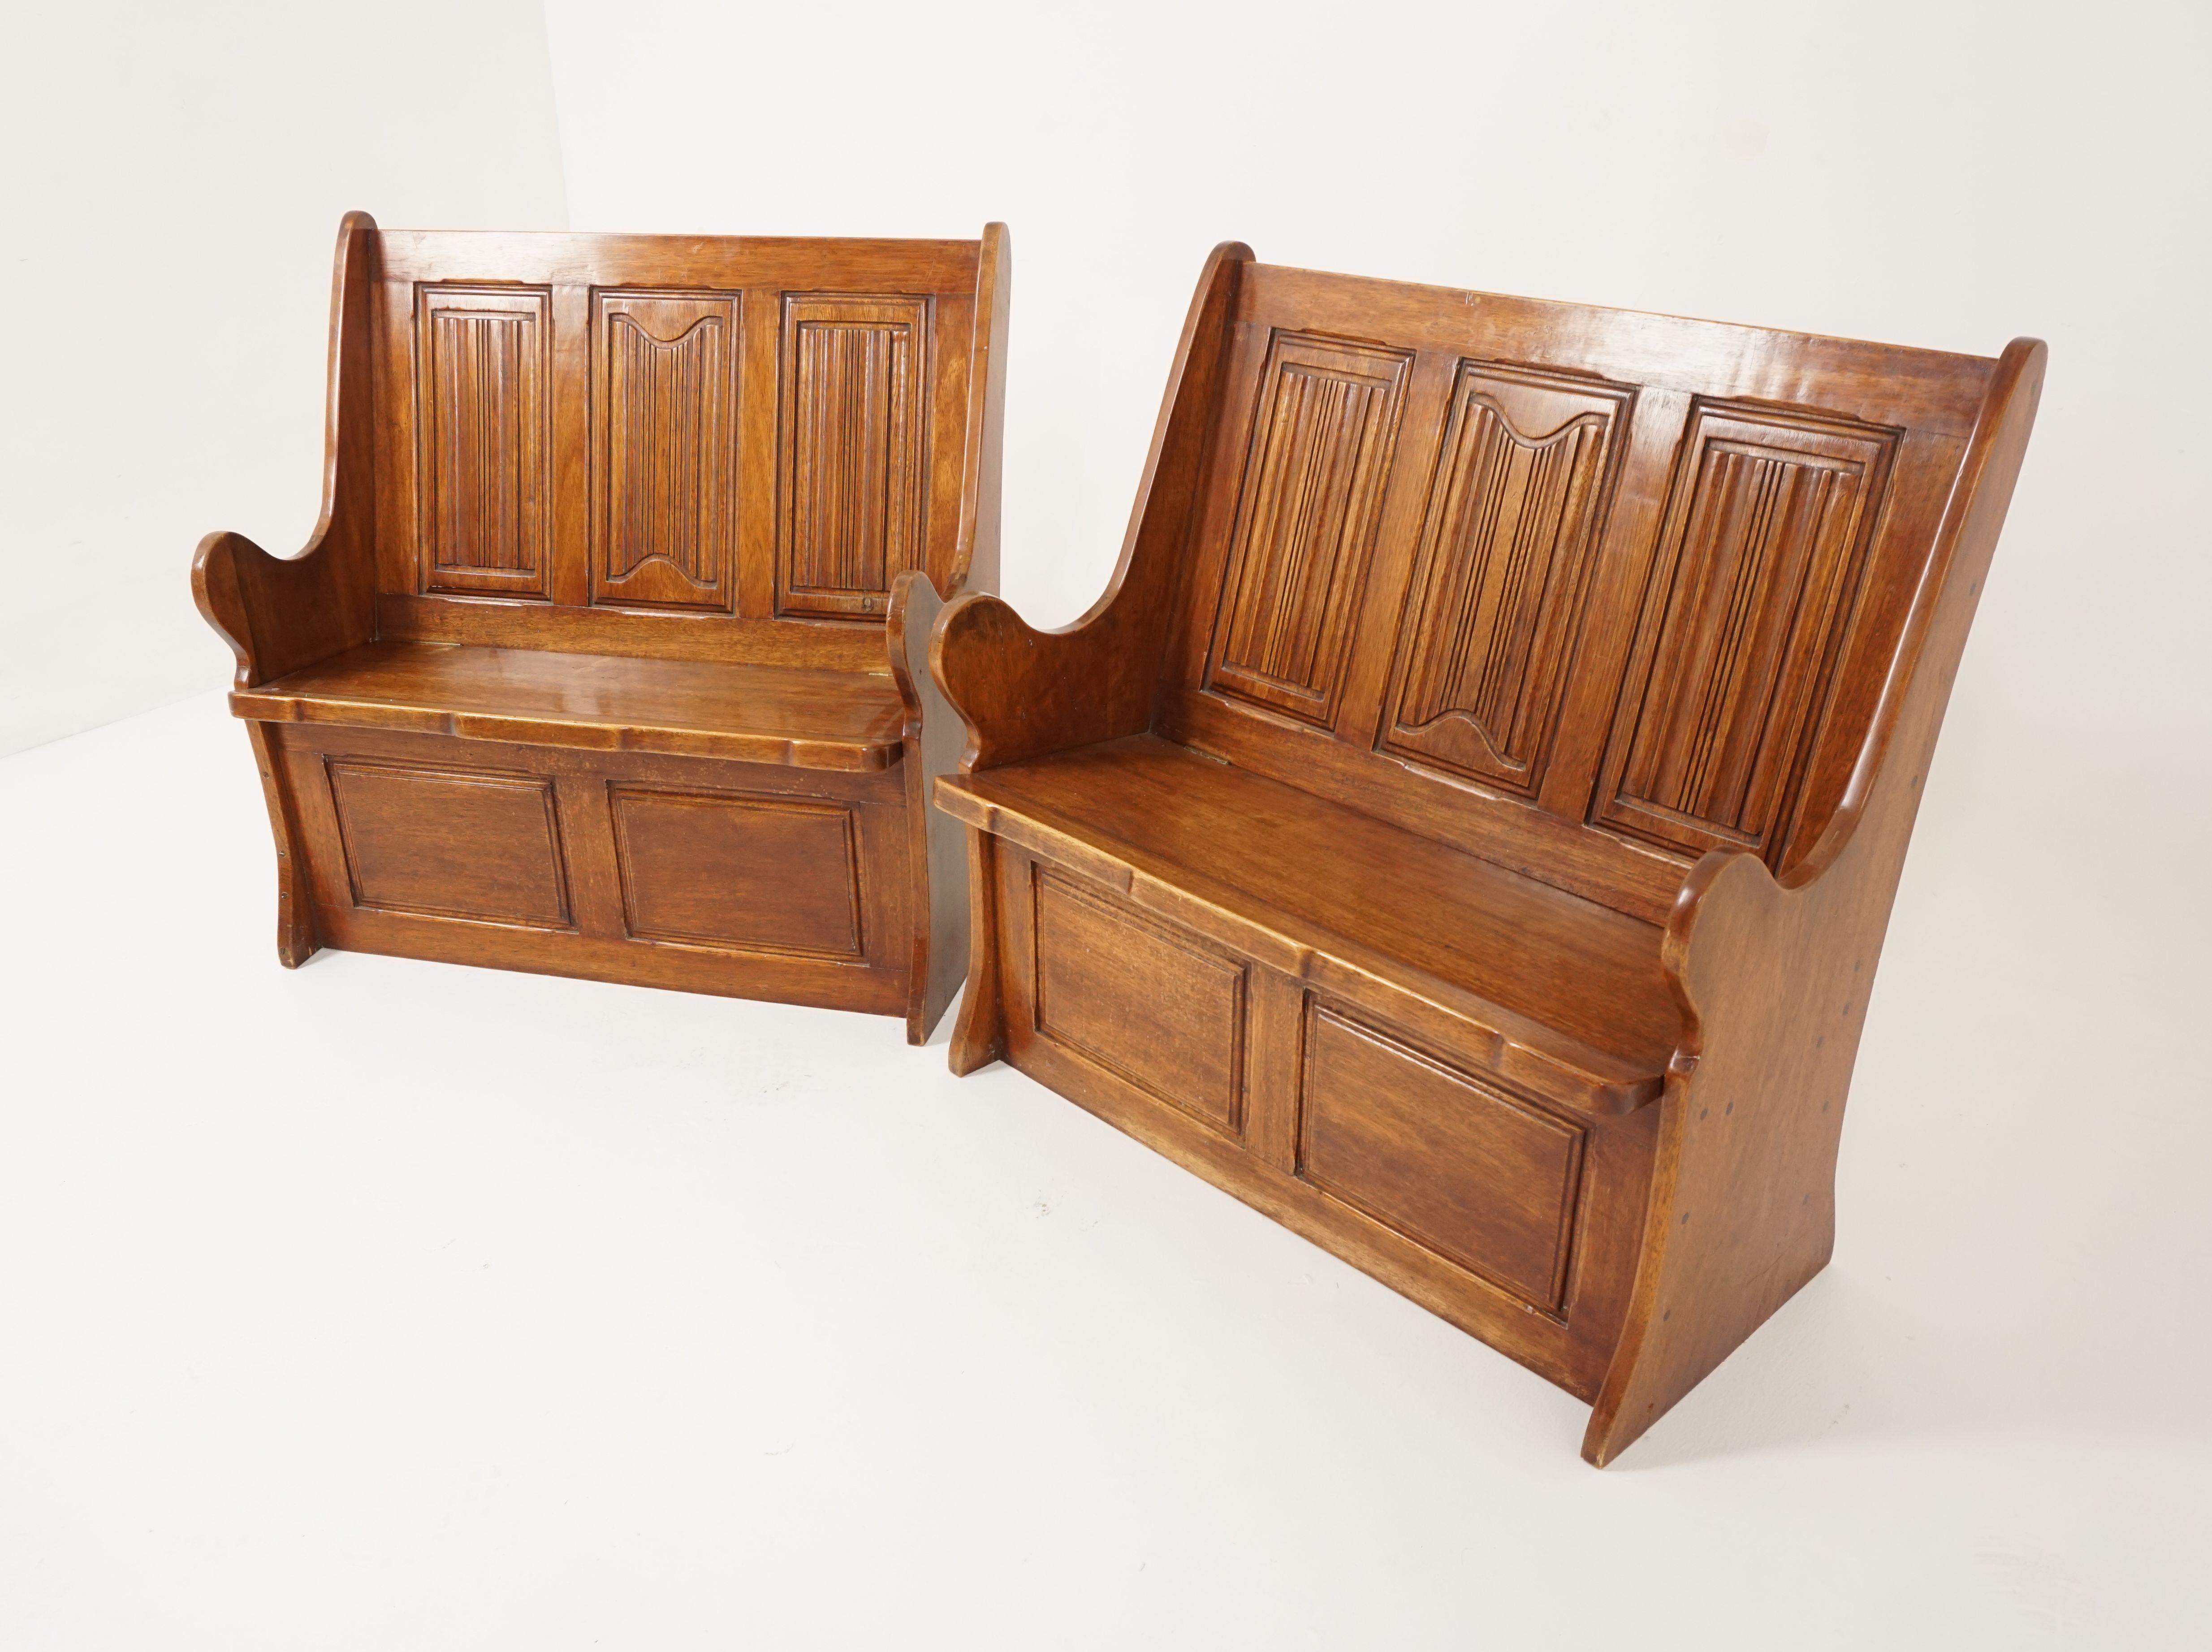 Pair of Vintage Caved Gothic Style Box Seat Low Benches, England 1950, B2569

England 1950
Solid Walnut
Original finish
Three carved linen fold panels to the back
Outswept arms to the side
Lift up hinged seat
Opens to reveal storage compartment
Pair